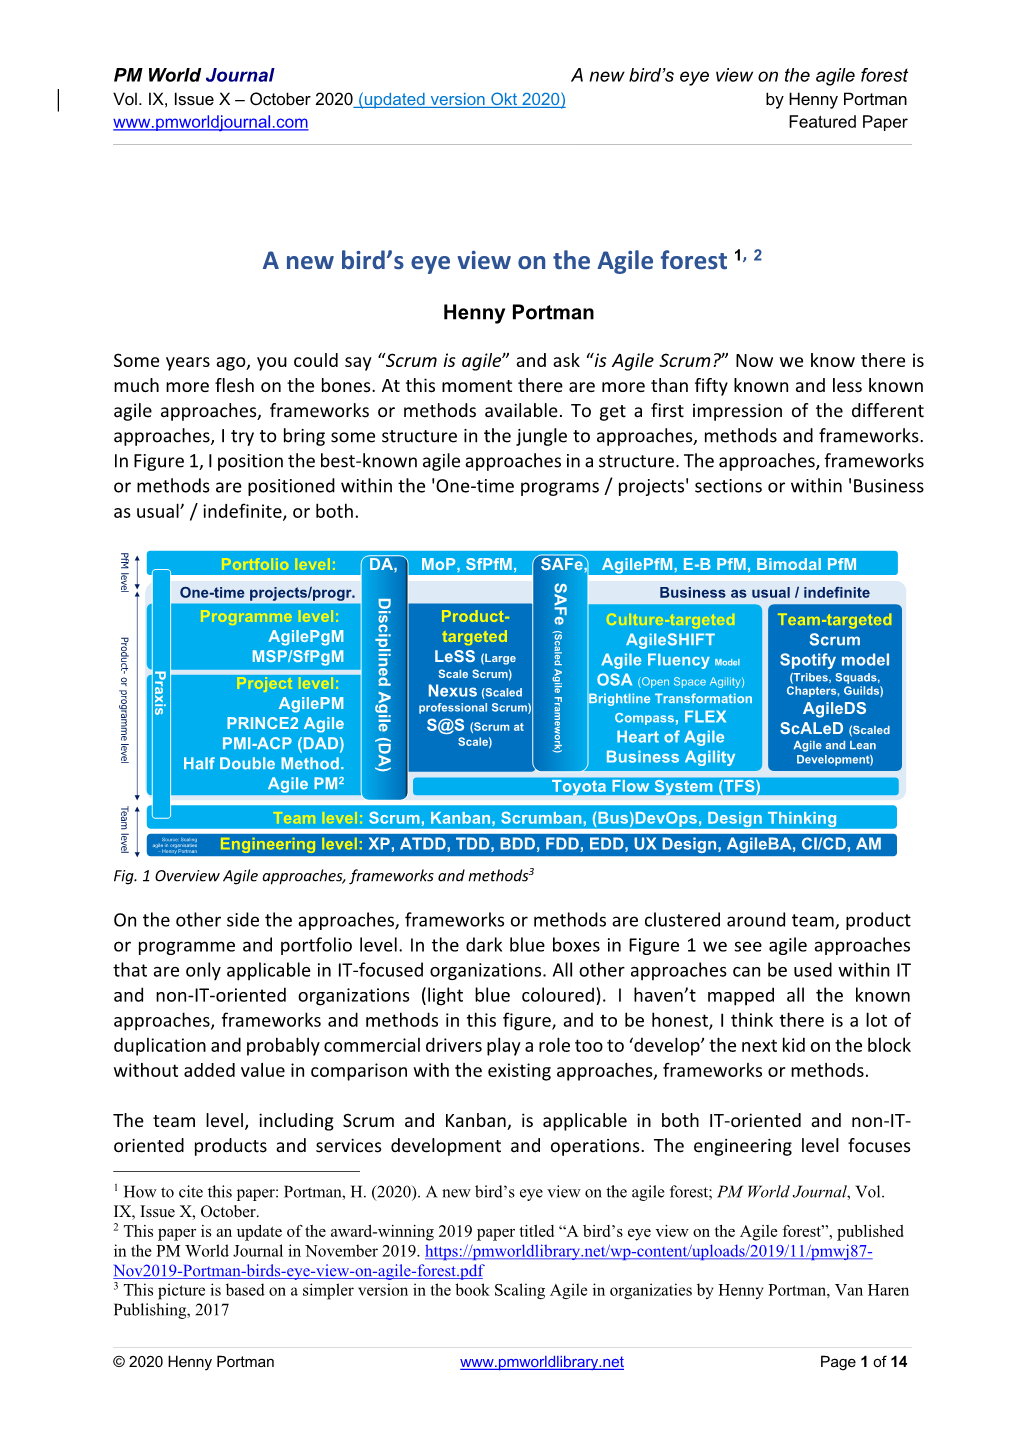 A New Bird's Eye View on the Agile Forest 1, 2